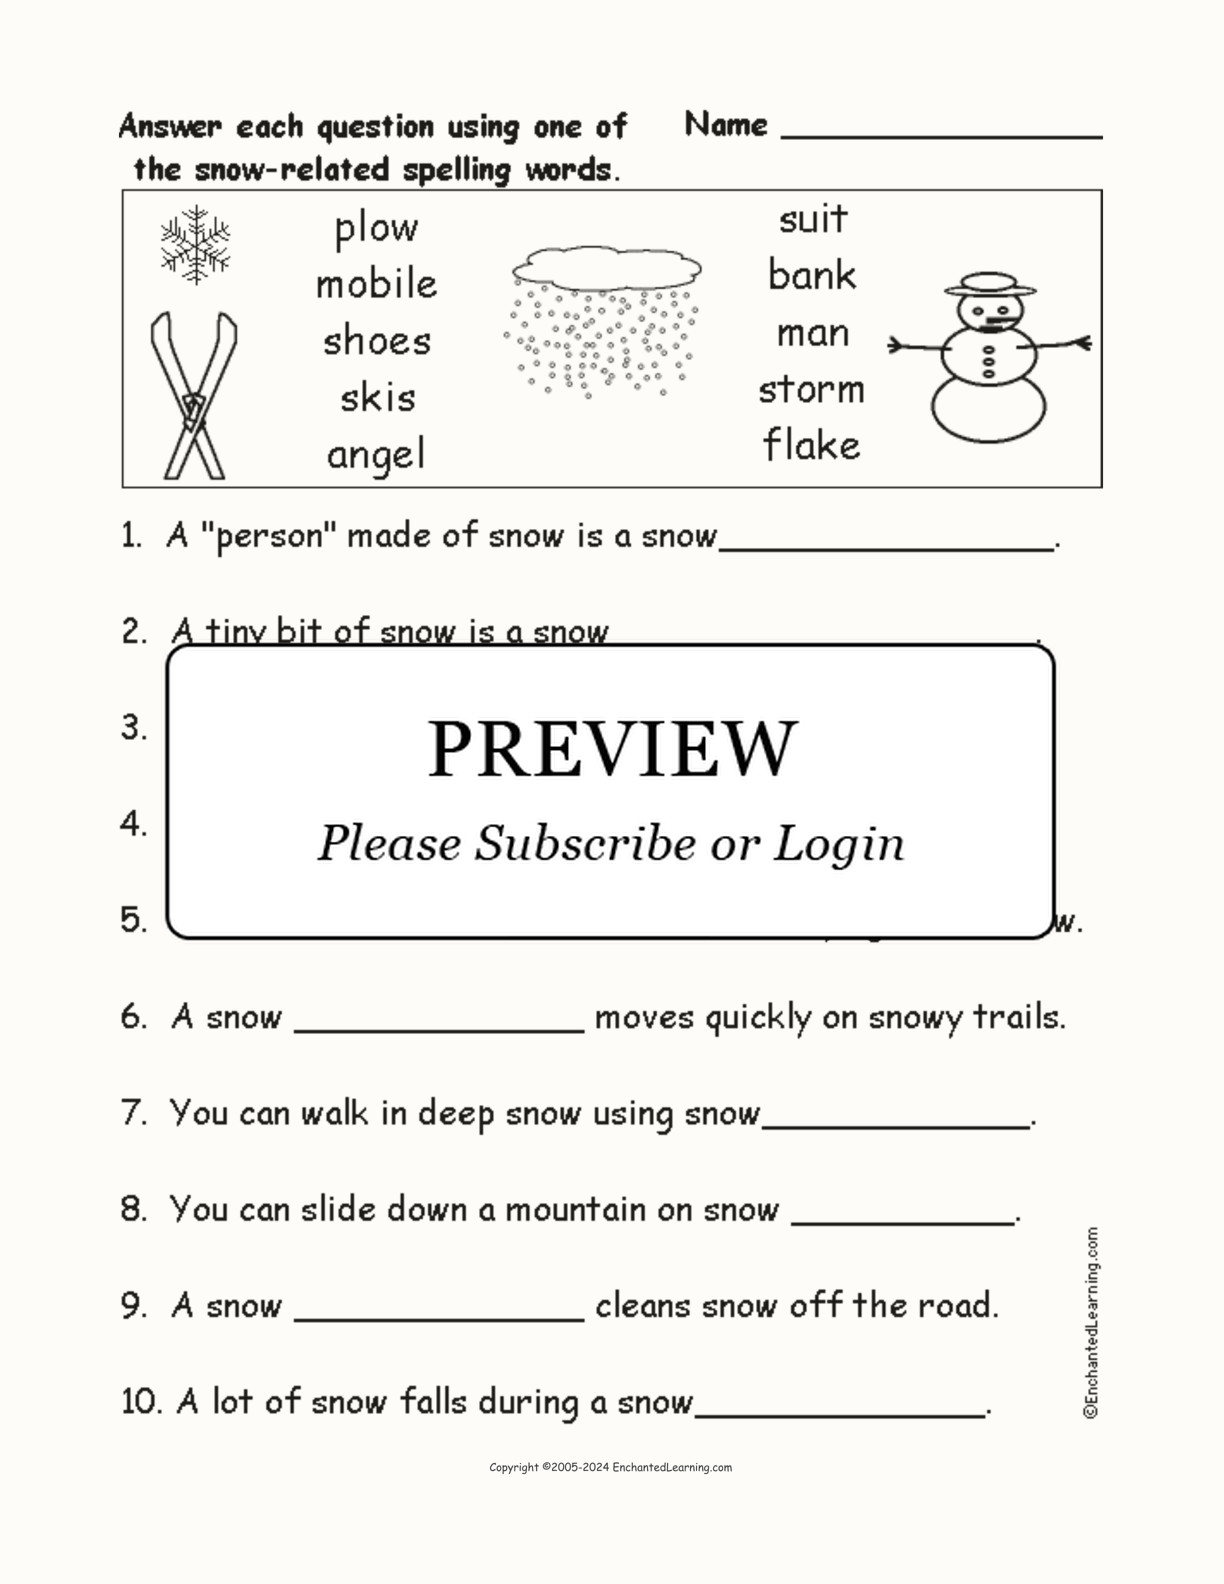 Snow-Related Spelling Word Questions interactive worksheet page 1